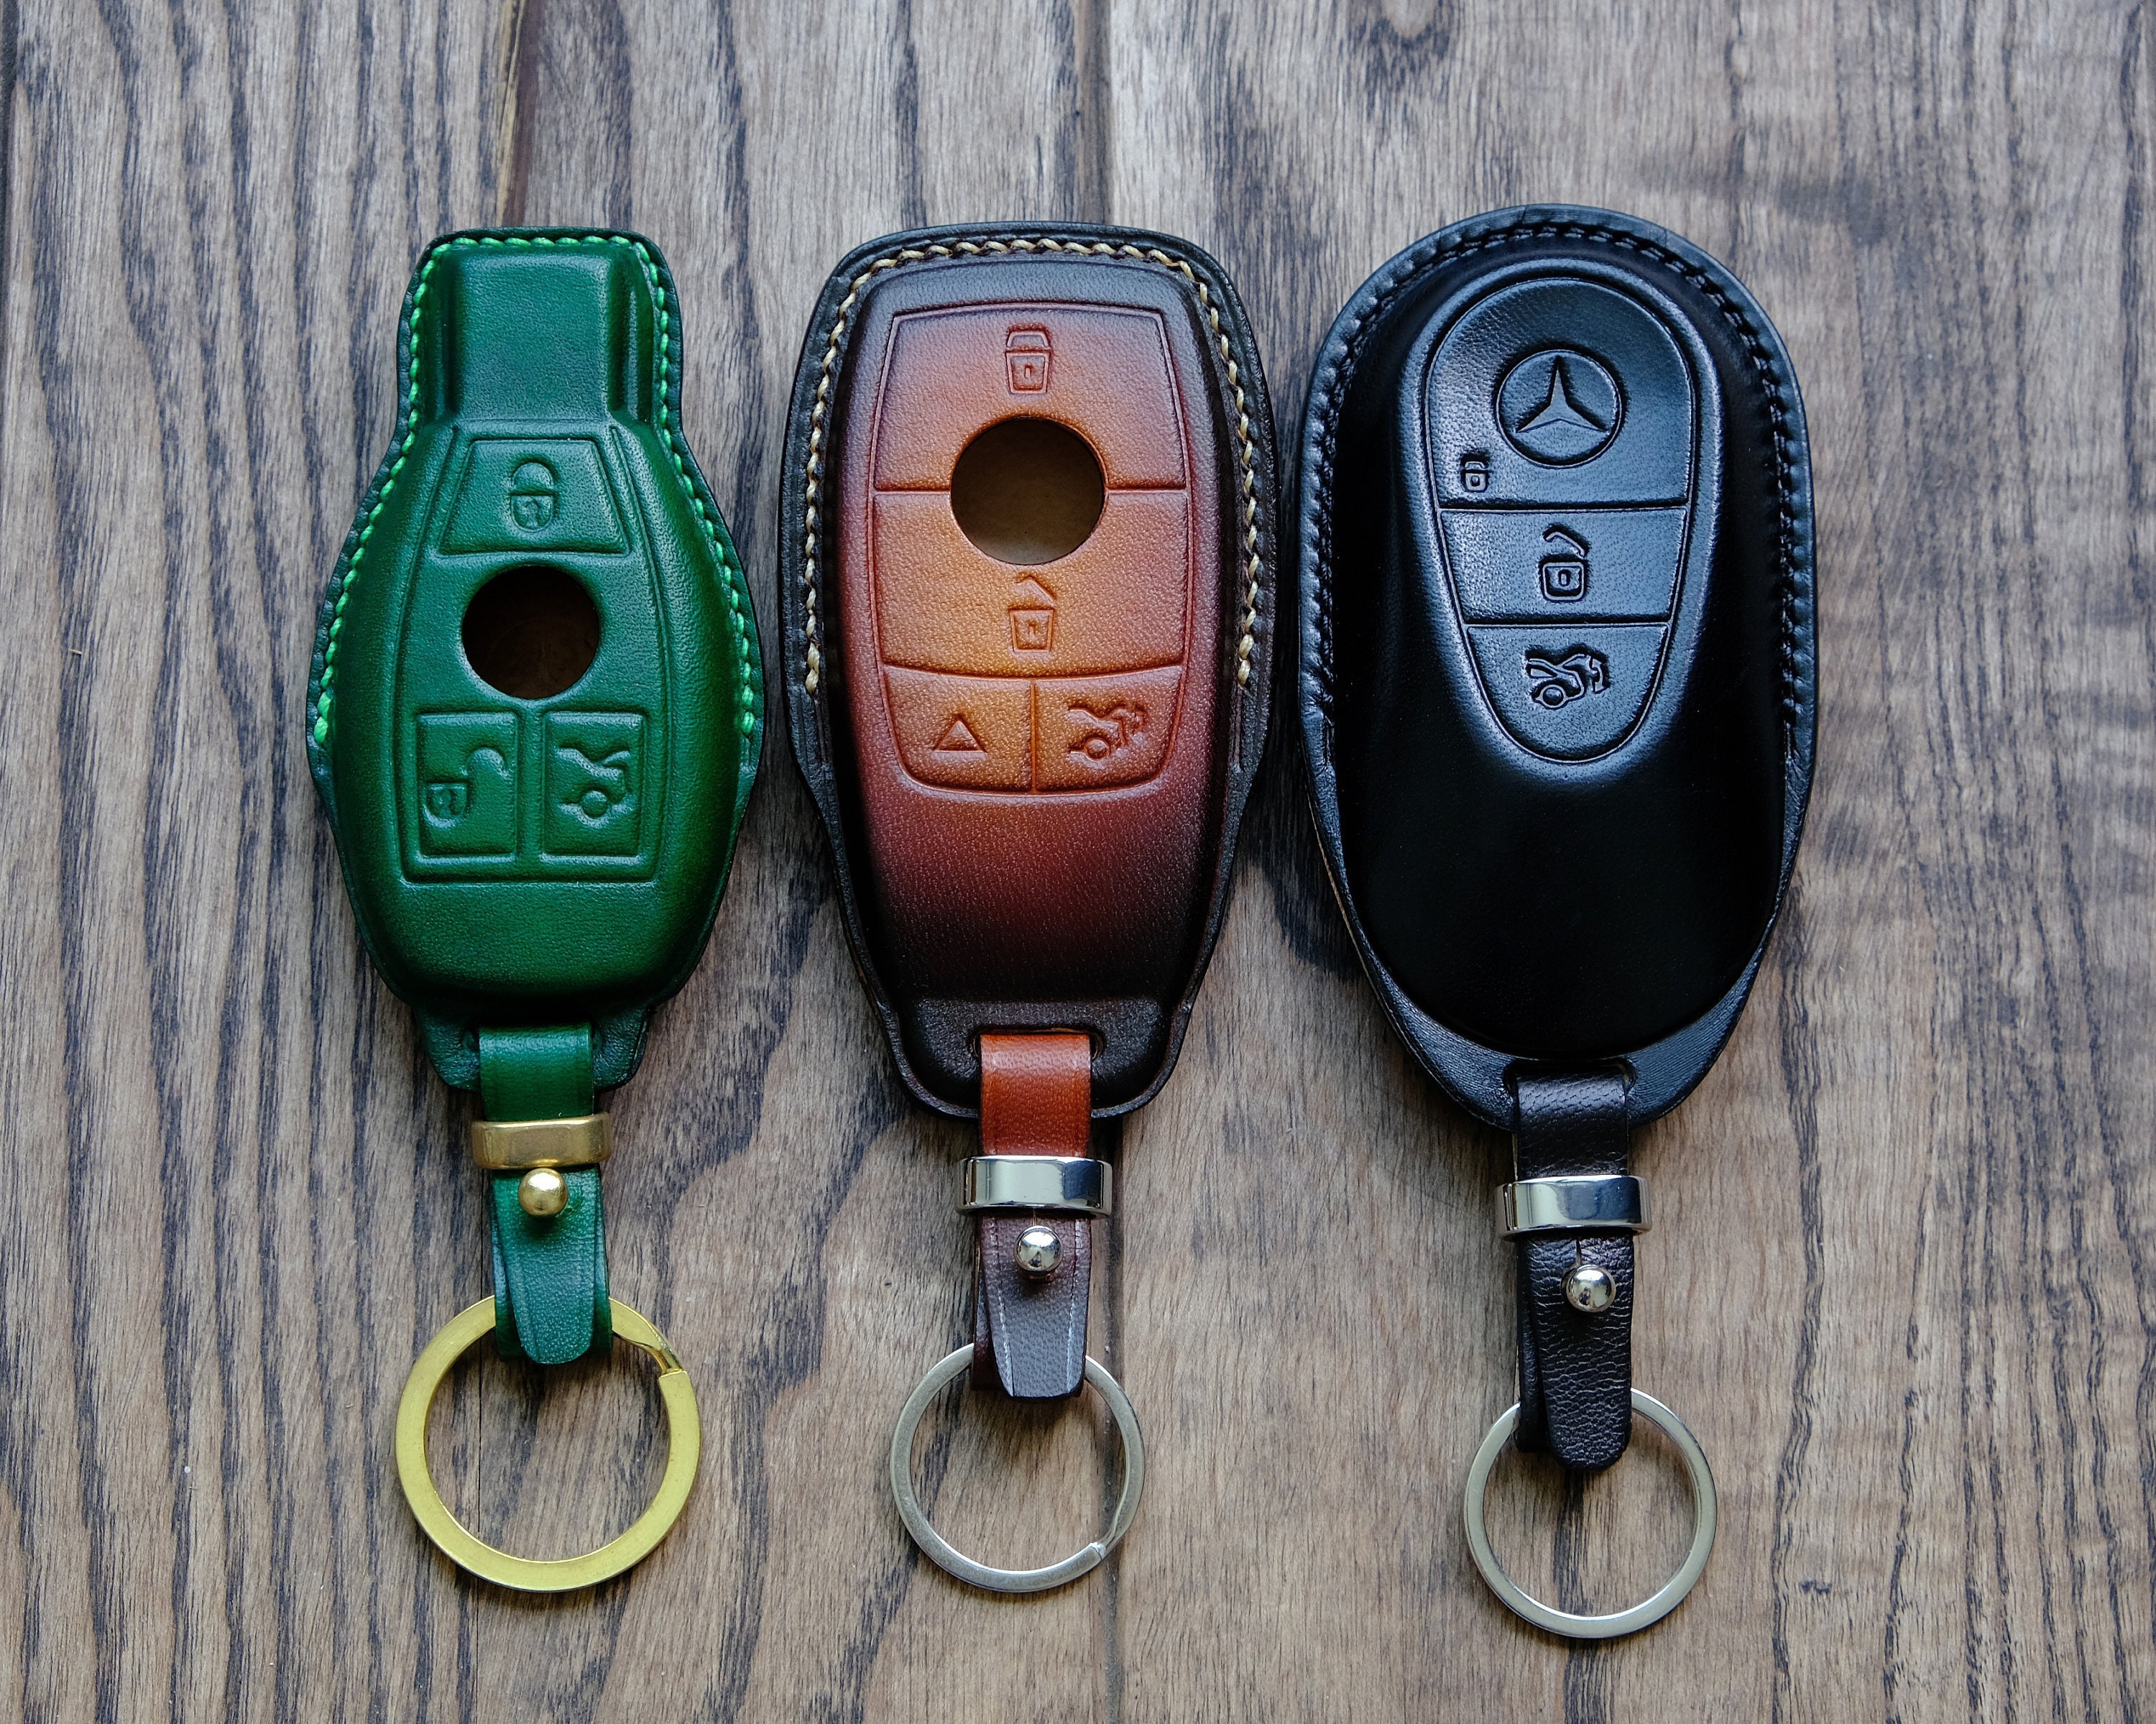 Premium Leather key fob cover case fit for Mercedes-Benz M8 remote key